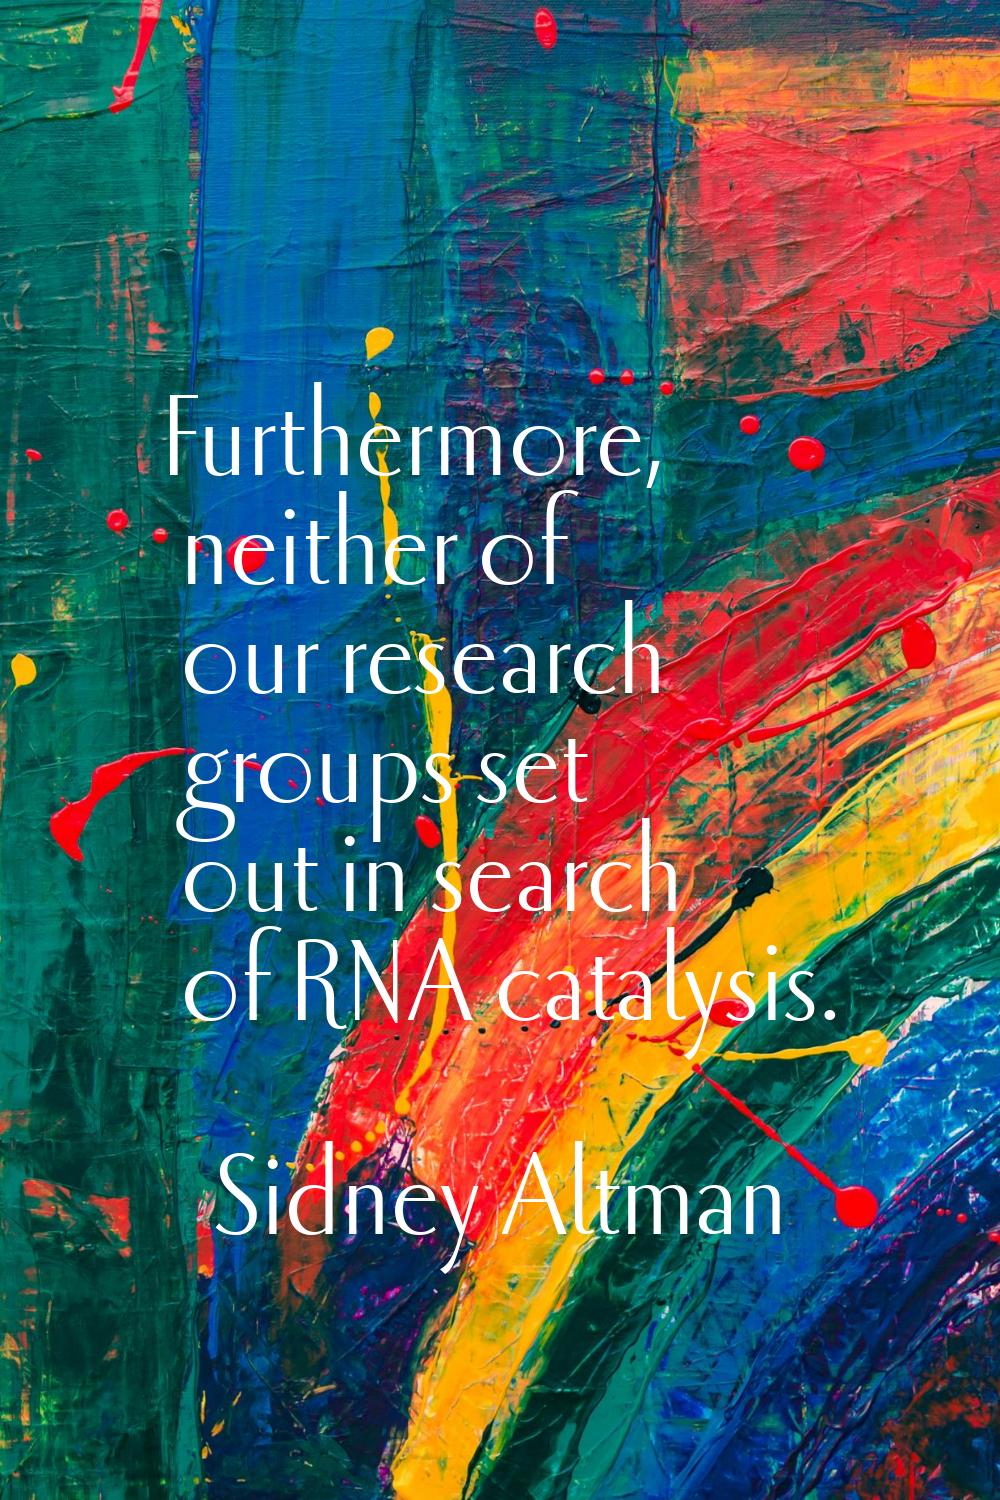 Furthermore, neither of our research groups set out in search of RNA catalysis.